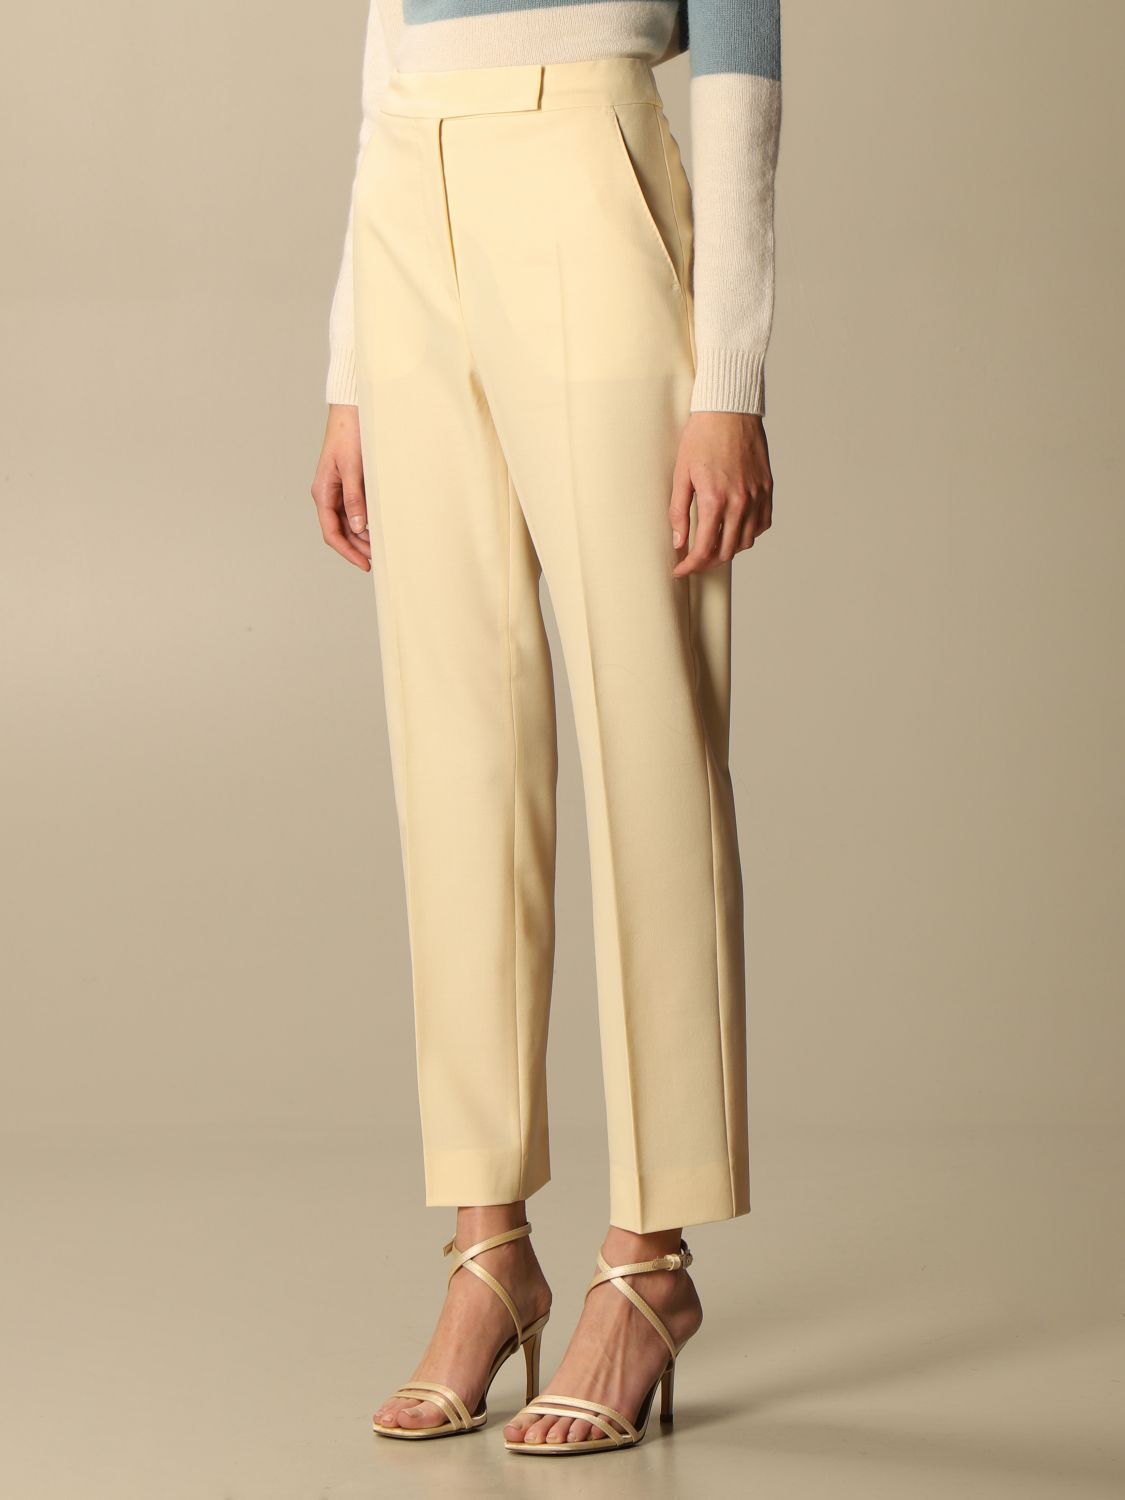 Tempo Max Mara trousers in virgin wool and Mohair